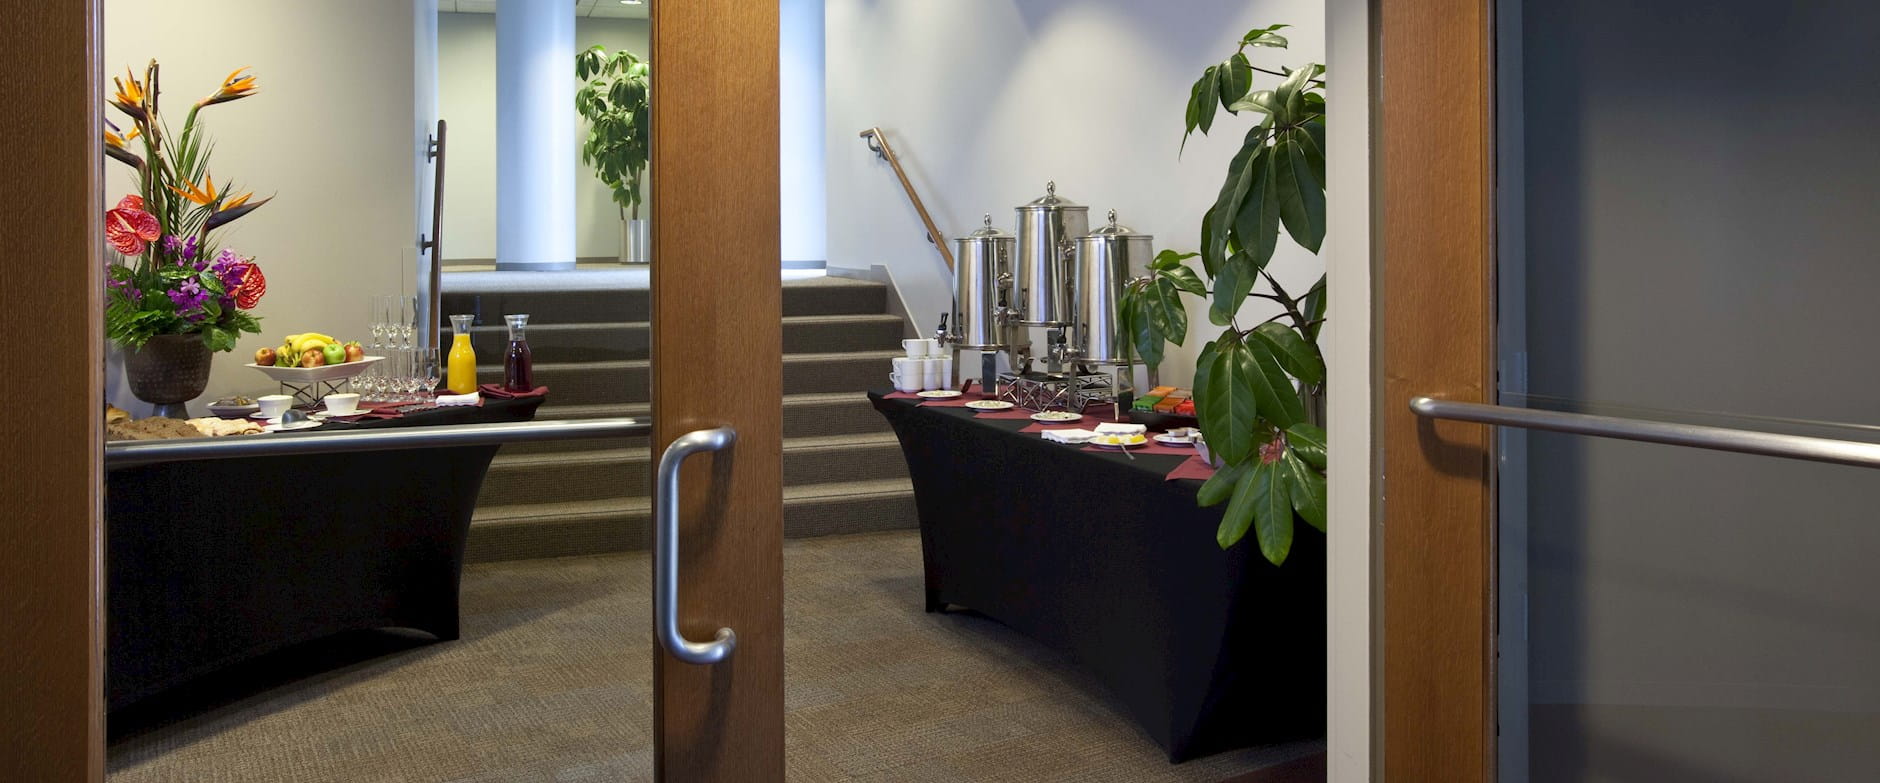 The foyer of one of the Gleacher Center's rooms with stairs leading up and a snack and coffee station along the walls